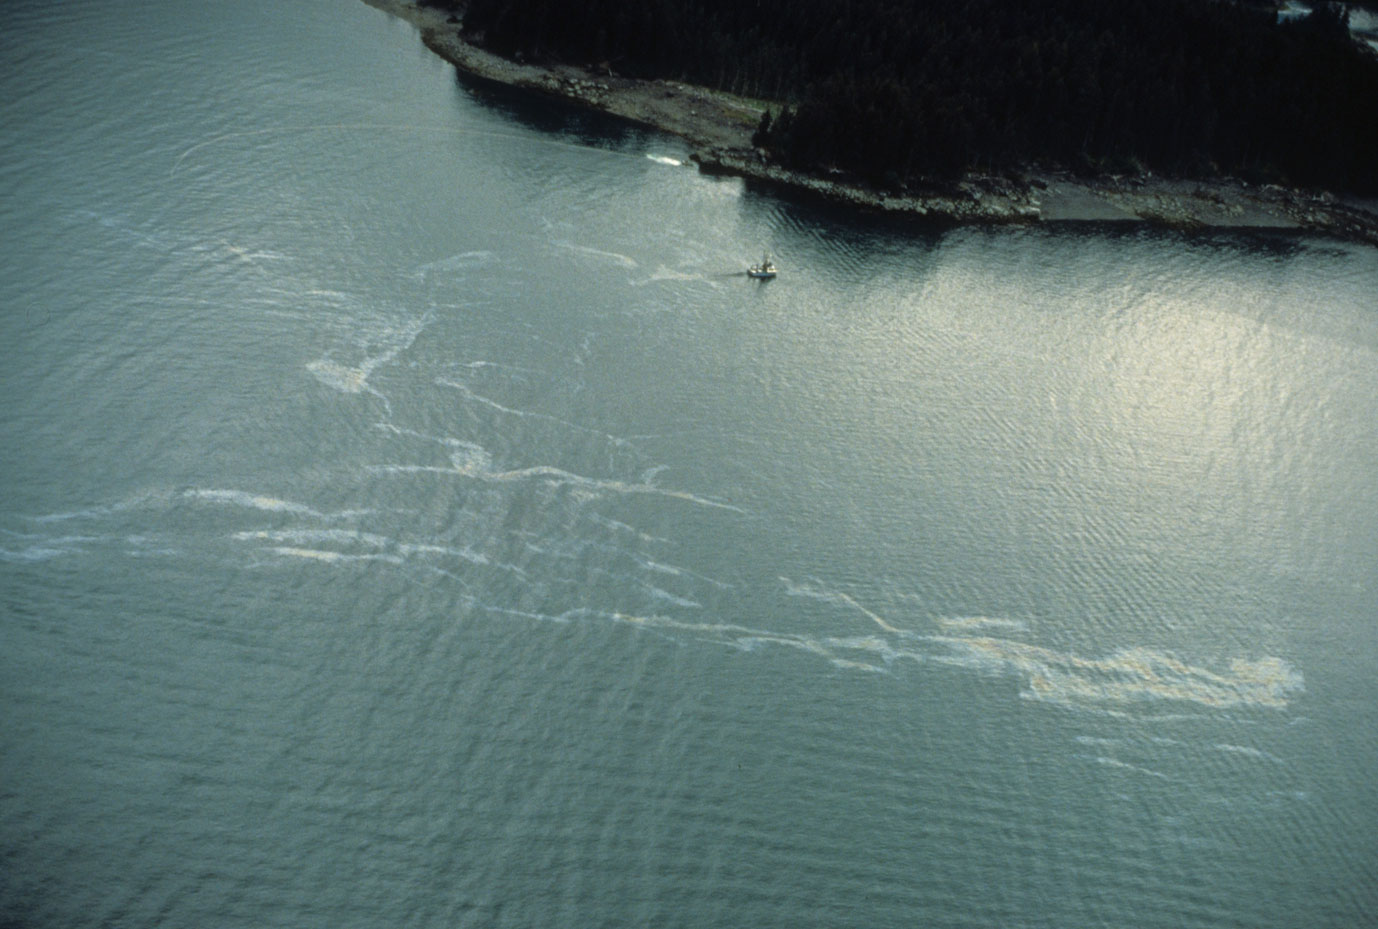 Aerial photograph of Kachemak Bay on the Gulf of Alaska showing an oil slick (shiny streaks) on the water as a result of the Exxon Valdez oil spill.